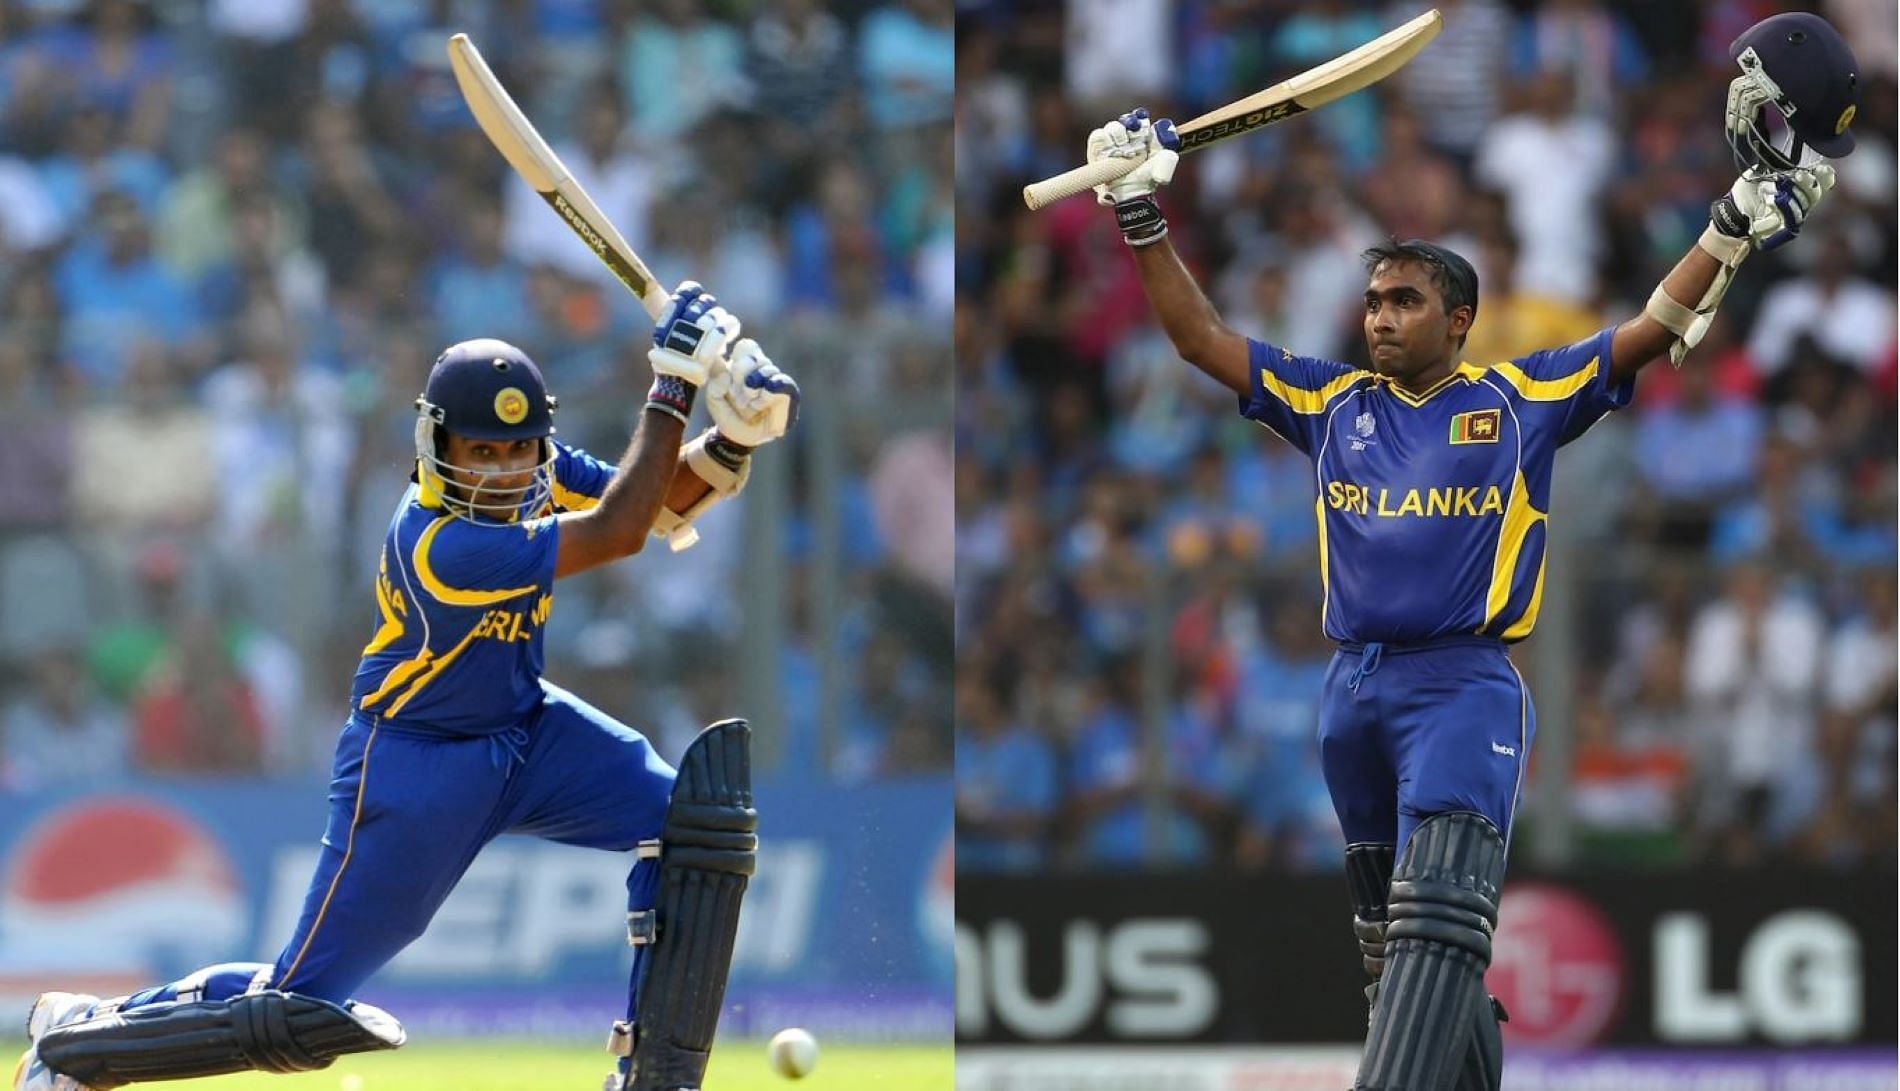 Jayawardene stunned the Wankhede crowd with his strokeplay.